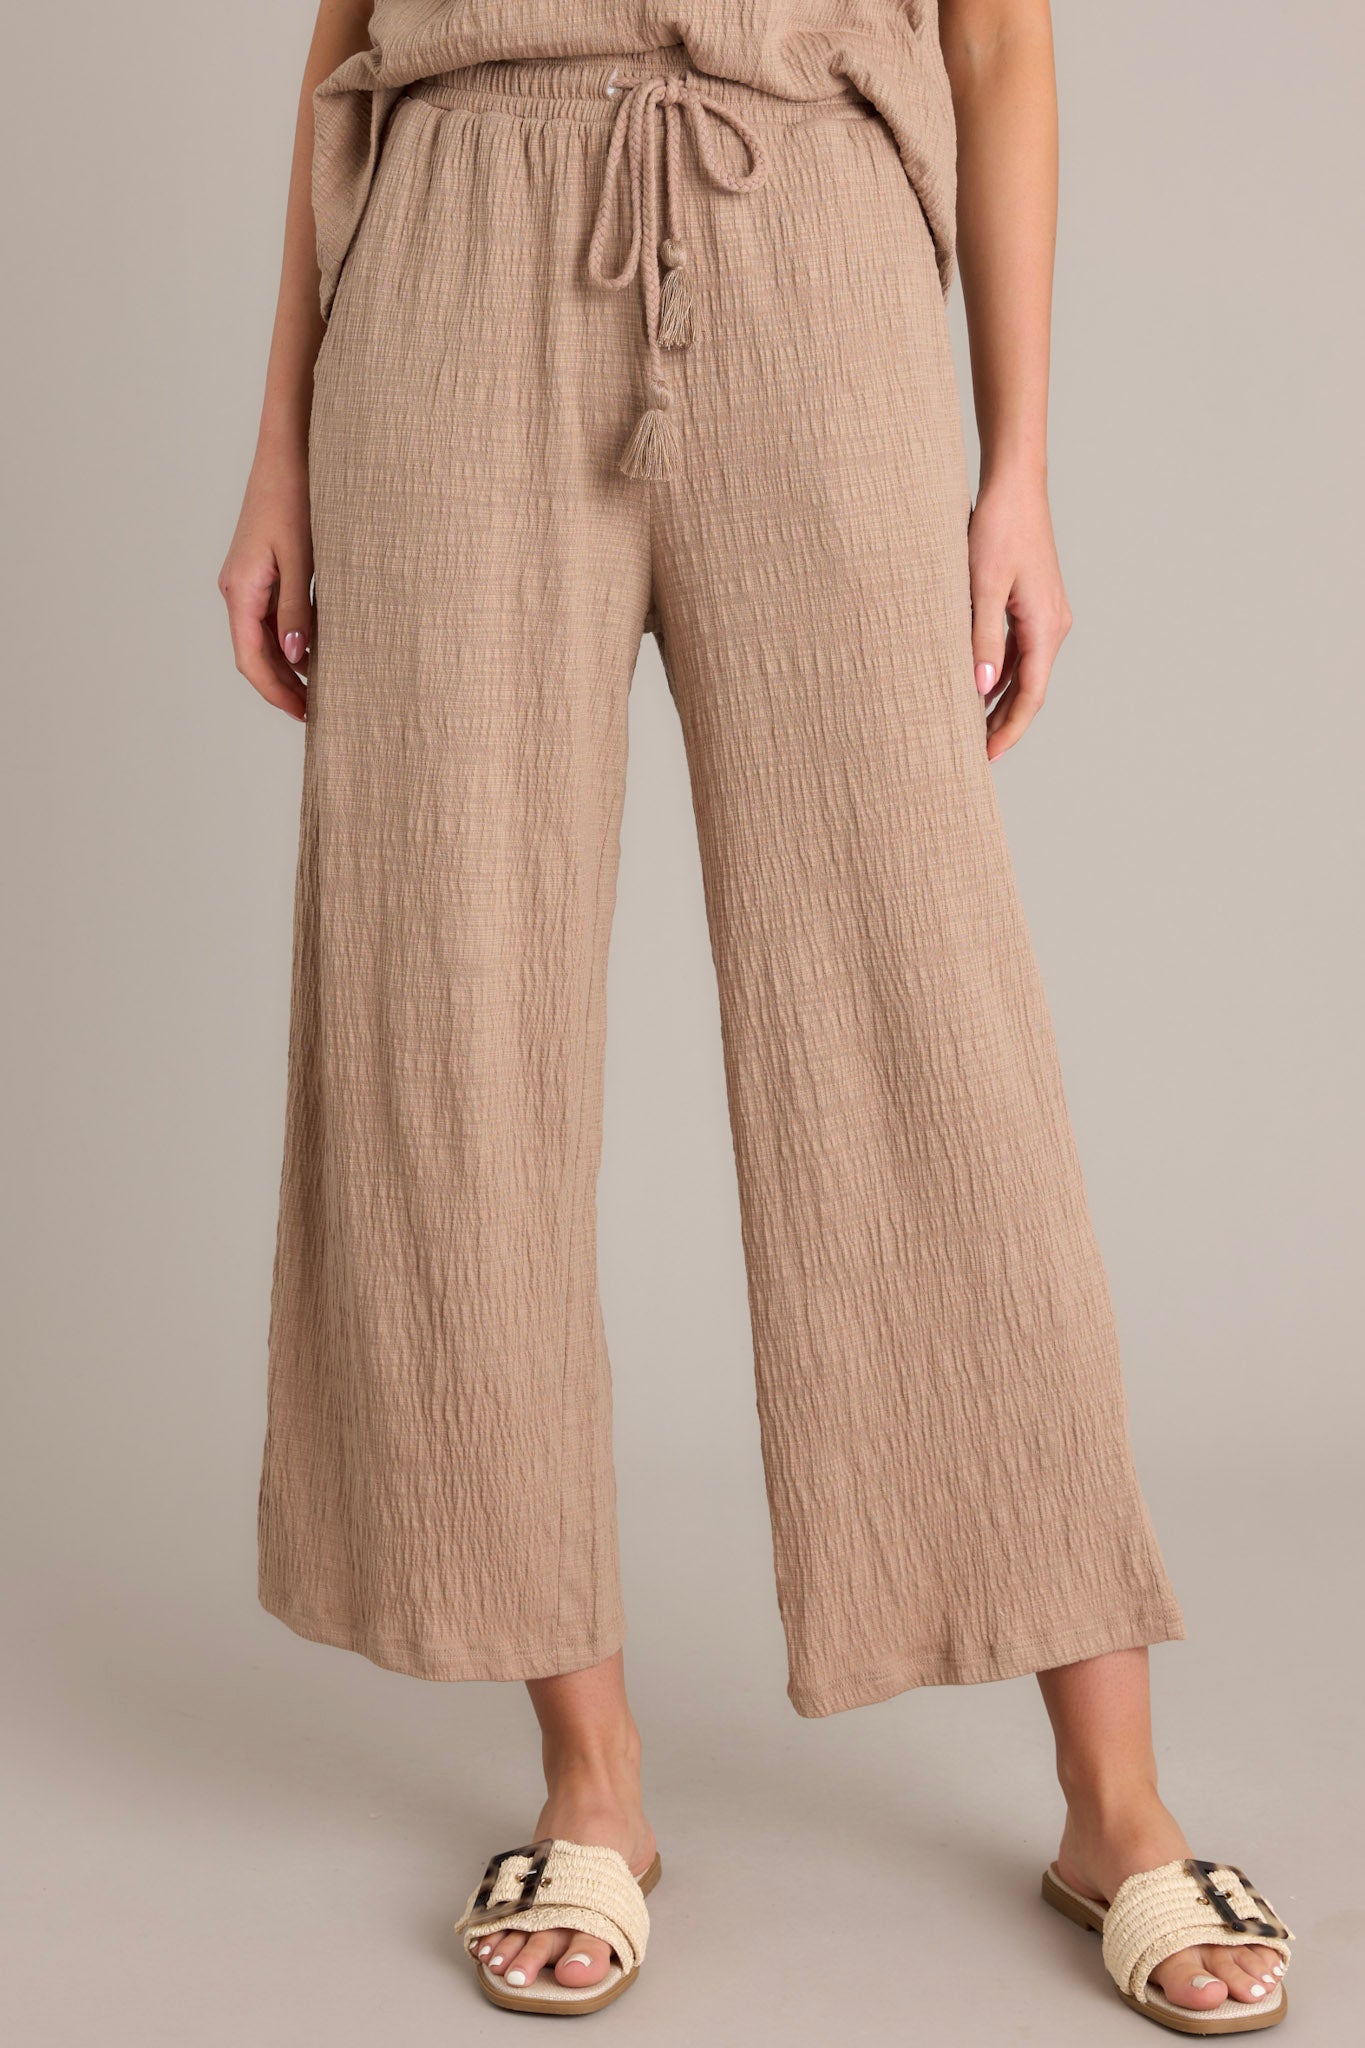 Front view of high-waisted beige pants featuring an elastic waistband, self-tie drawstring, functional hip pockets, textured material, and wide legs.